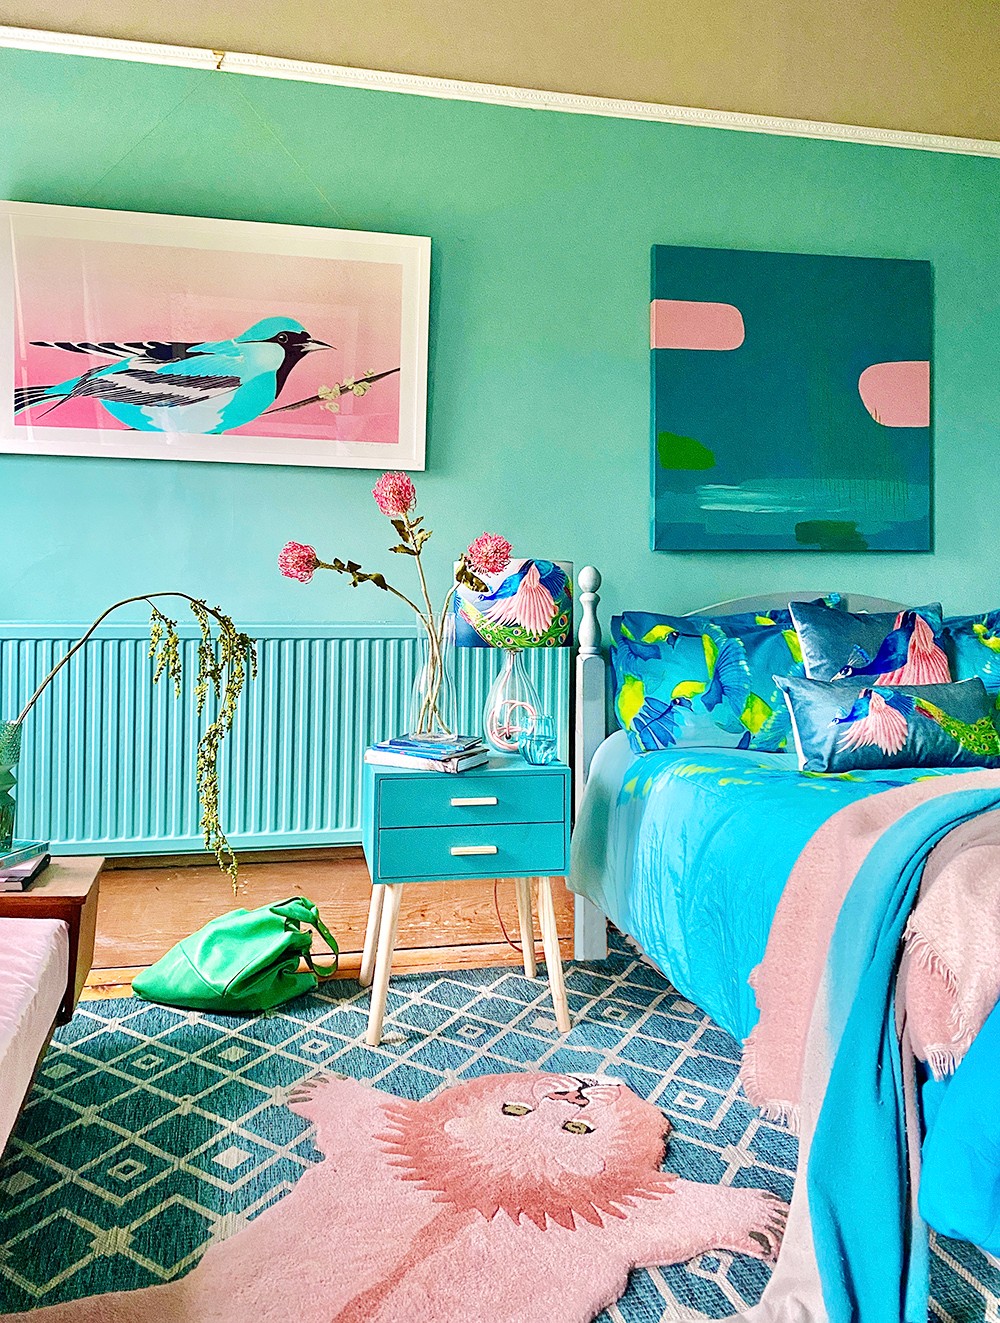 <img src="green.jpg" alt="green and pink colourful bedroom"/> 